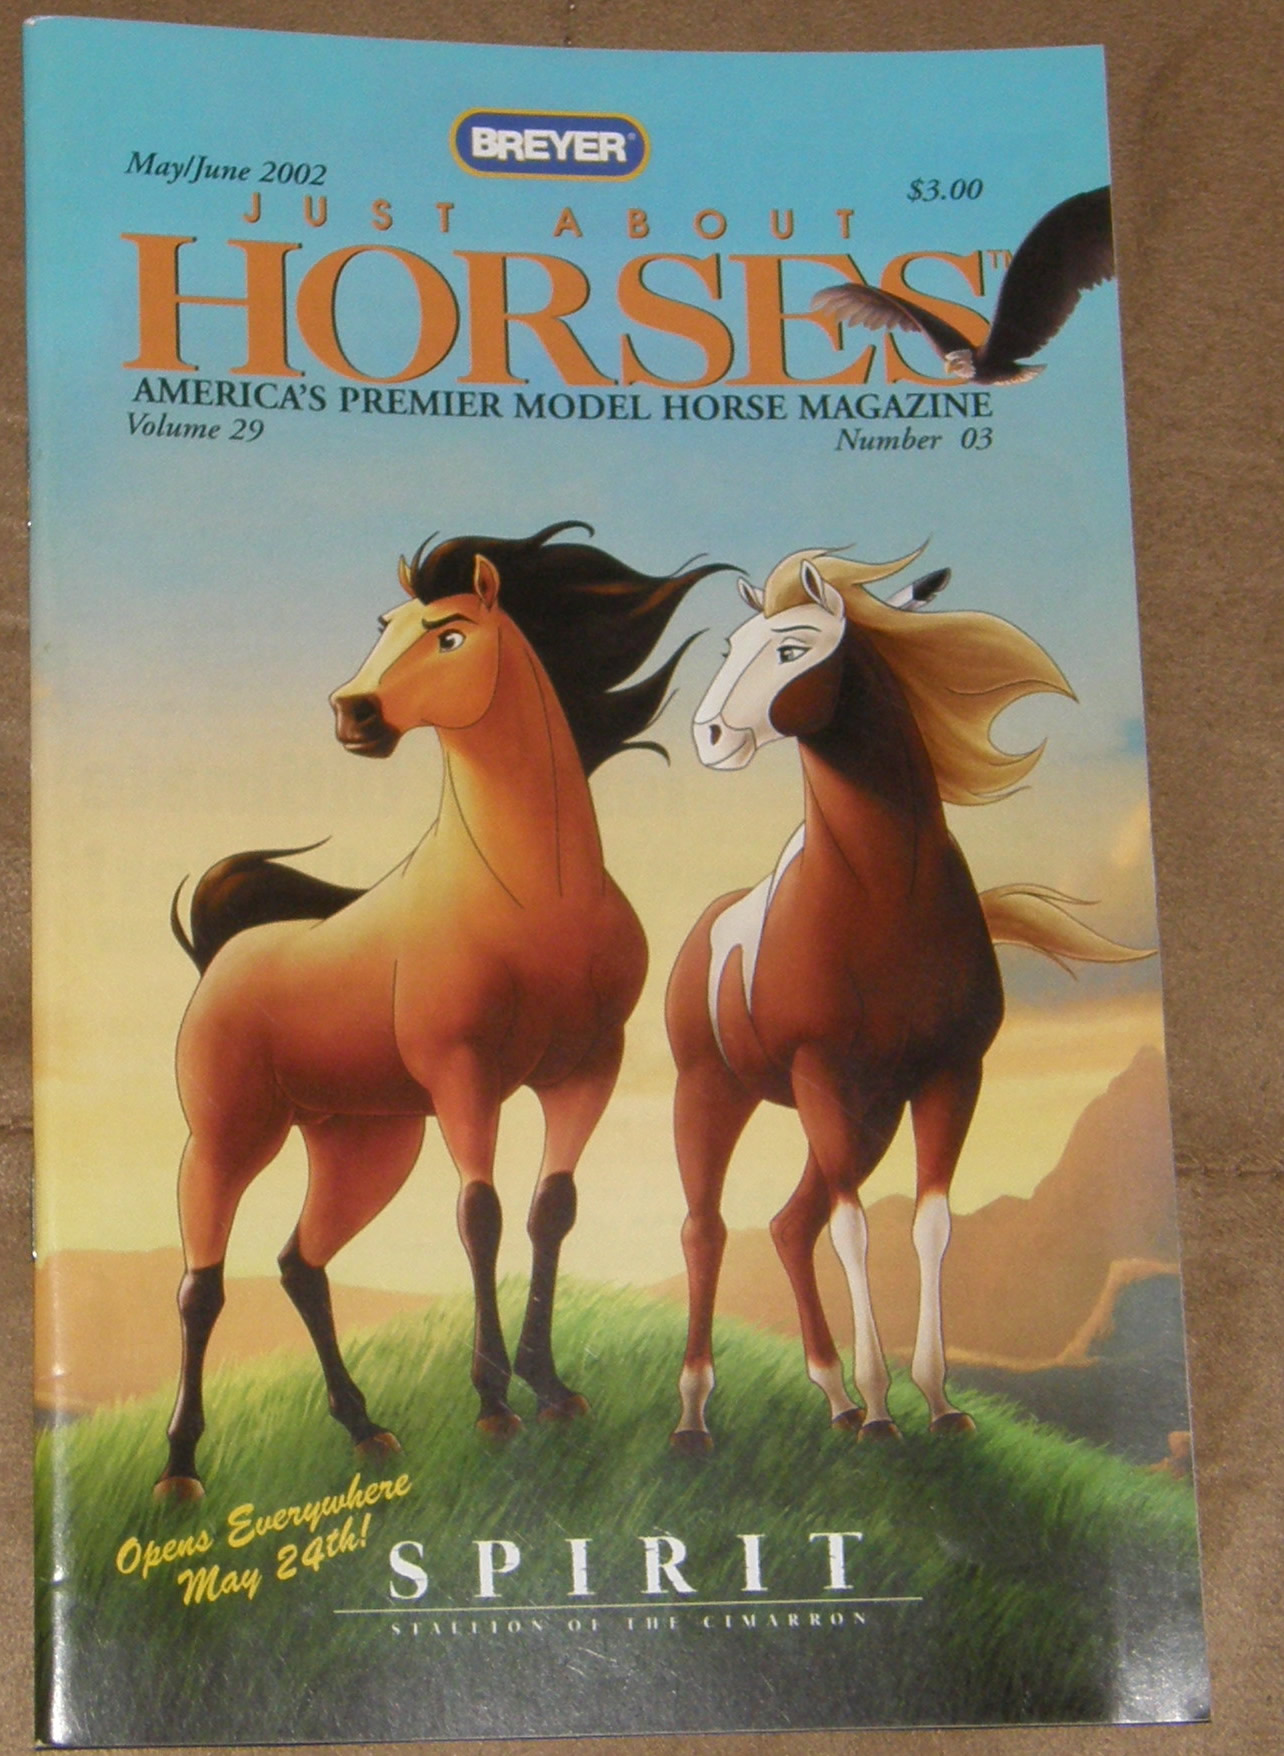 Breyer Just About Horses JAH May/June 2002 Volume 29 Number 3 Sprit Stallion of the Cimarron